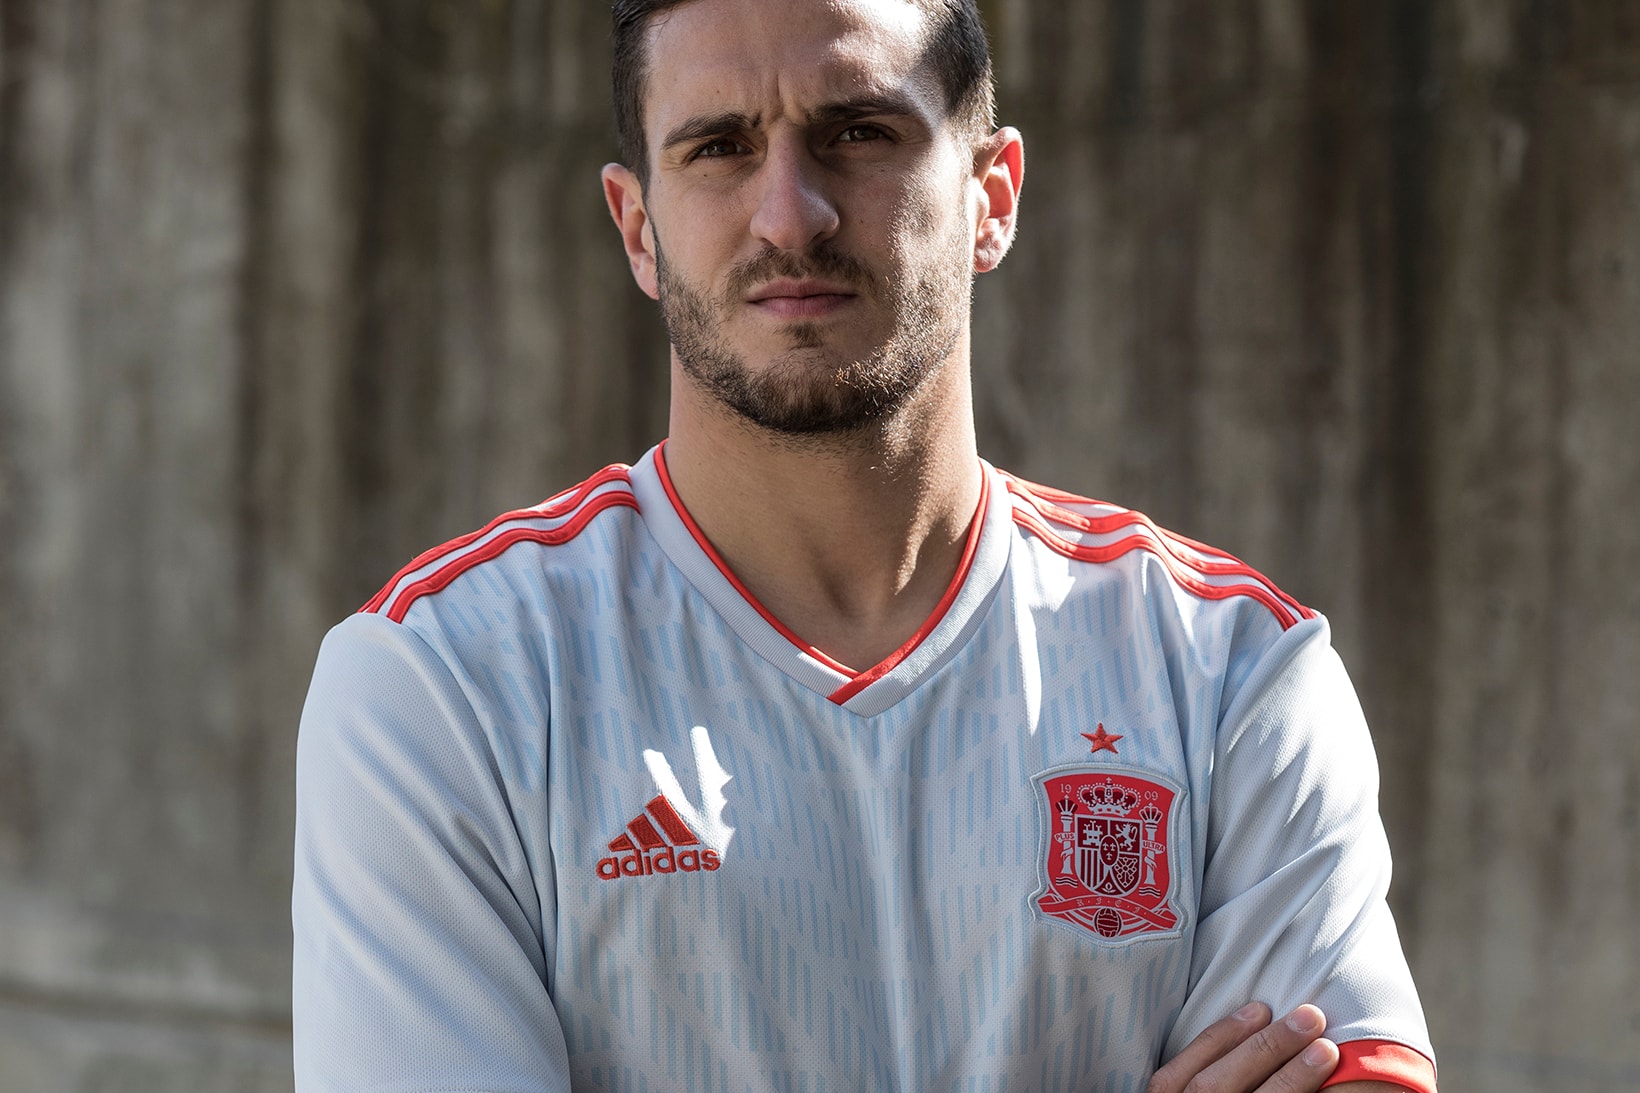 adidas 2018 World Cup FIFA Away Kits Football Soccer Jerseys Uniforms Germany Mesut Ozil Lionel Messi James Rodriguez Spain Argentina Colombia Belgium Russia Japan Mexico